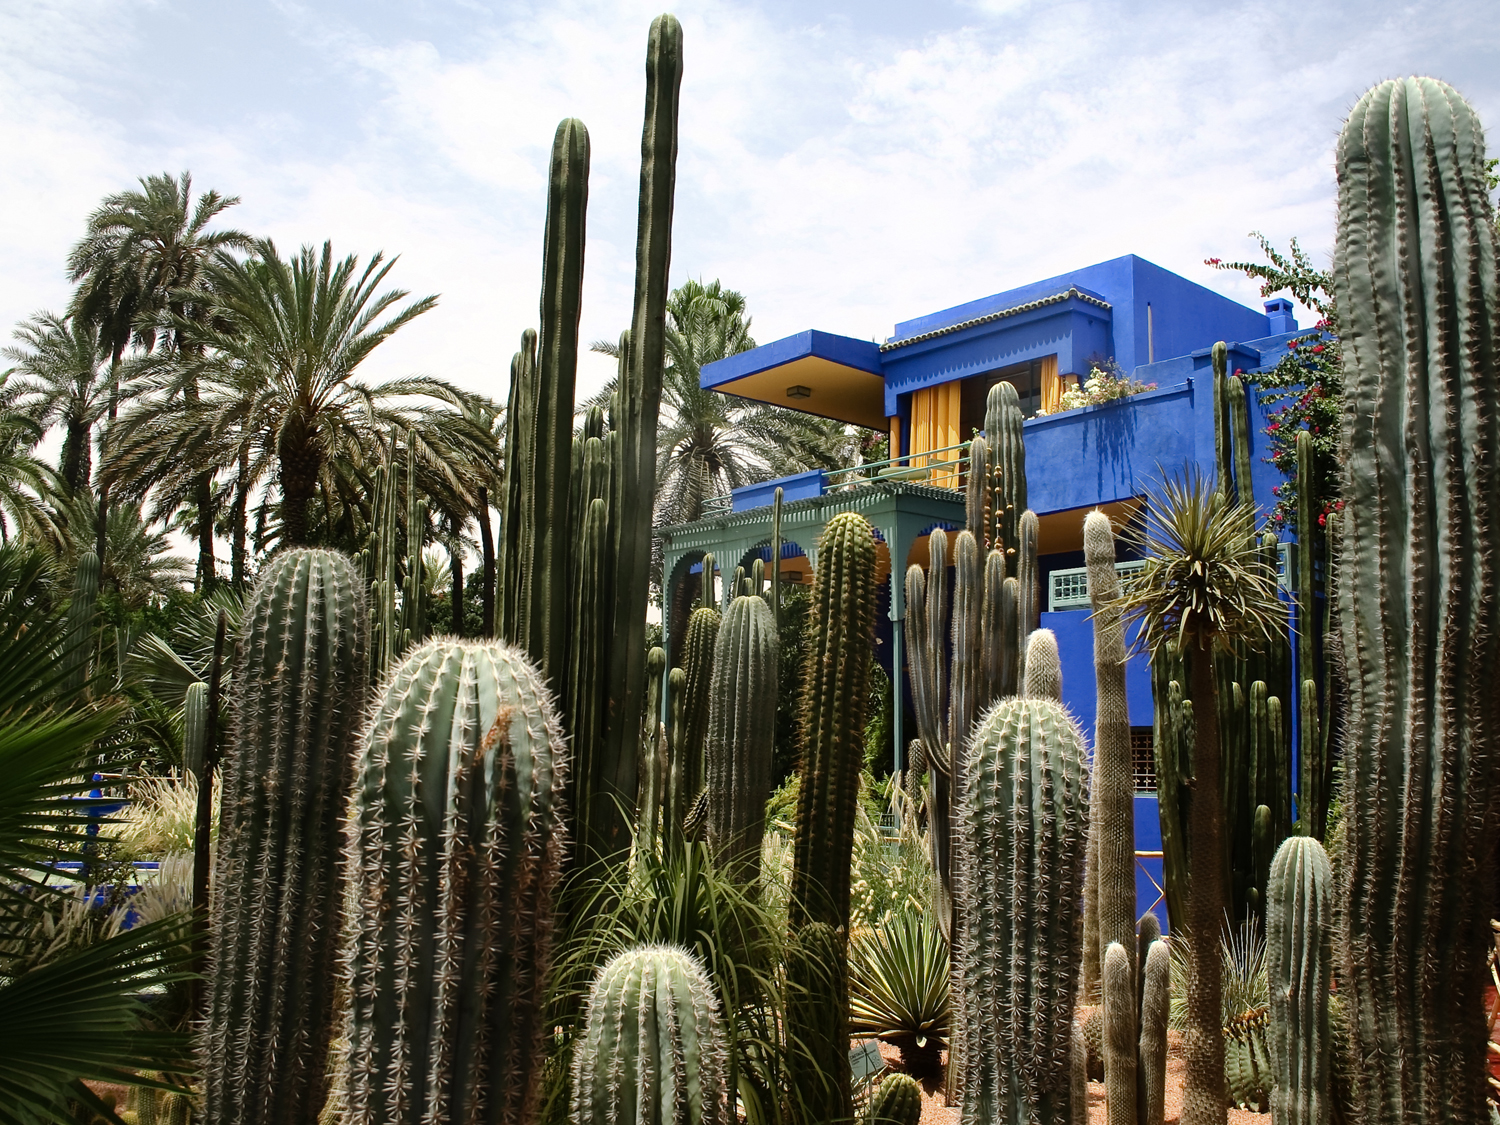 Cacti and a cubist villa at the Jardin Majorelle in Marrakech, Morocco